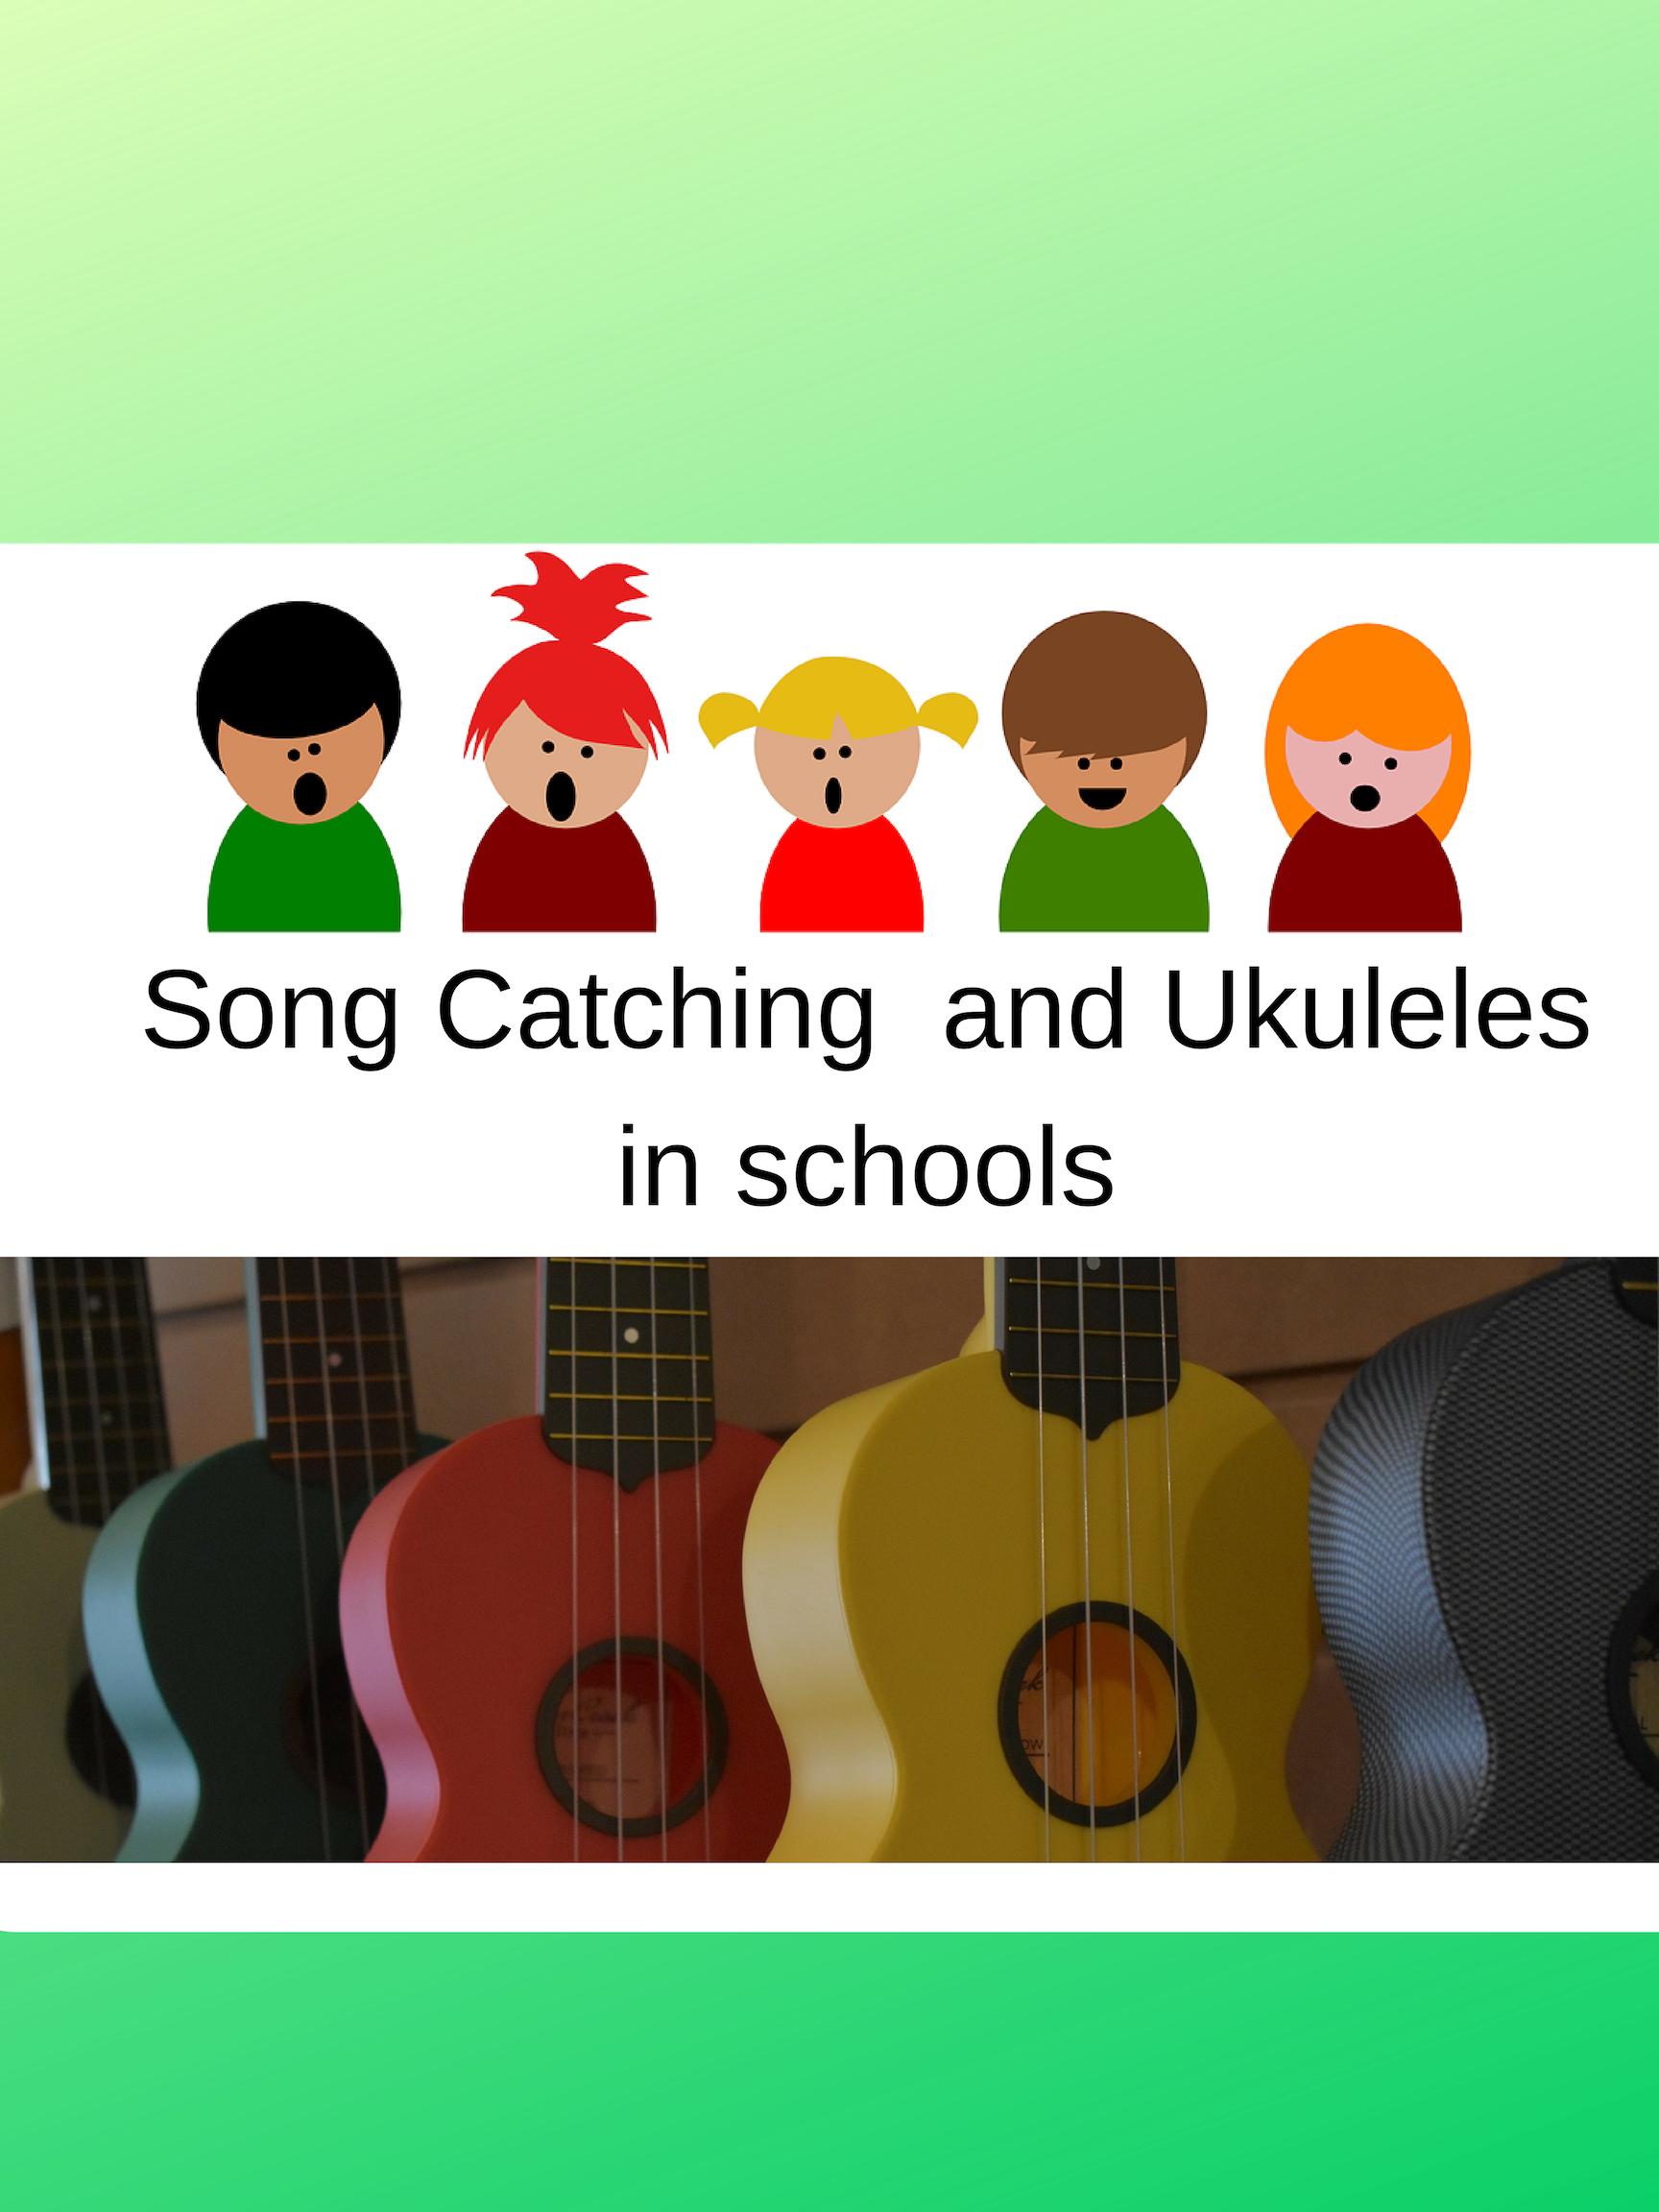 Ukulele and Song Catching in Schools